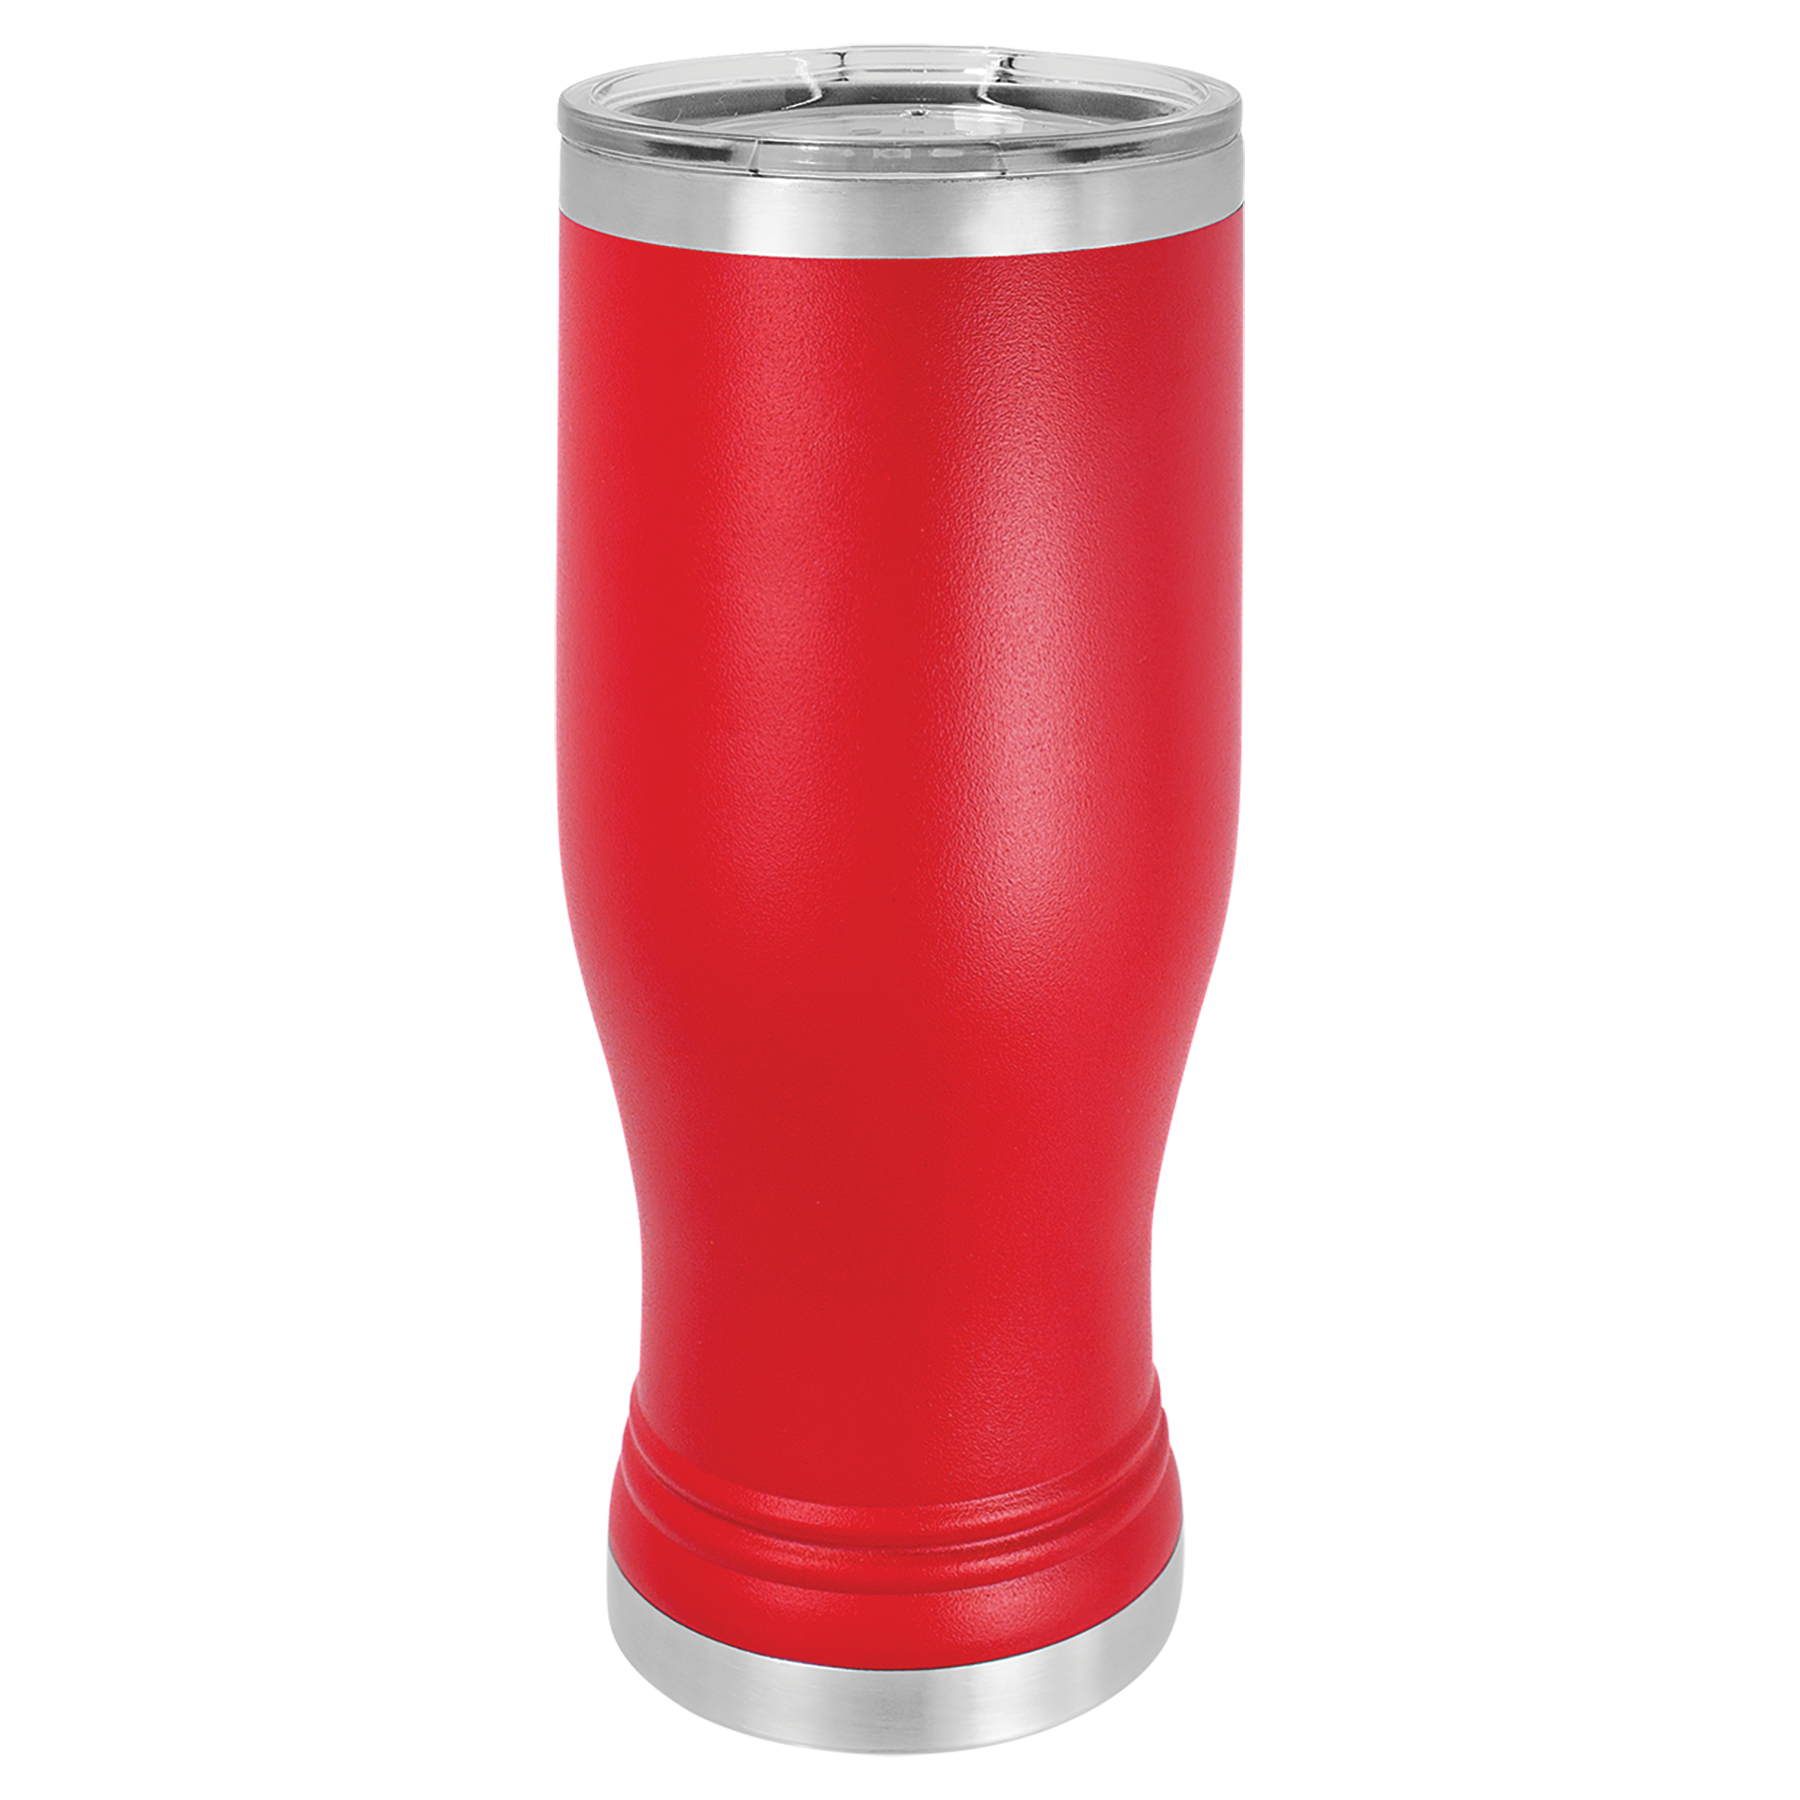 Red 20oz Pilsner Tumbler -One Free Engraving -Fits most Cup Holders -Double-wall Vacuum Insulated -Made from 18/8 Gauge Stainless Steel (Type 304 Food Grade) -Lid is BPA Free (Hand Wash Only) -Not recommended for Dishwasher -Works with Cold and Hot Drinks -17 Color Options -Perfect for Personalized Gifts, Awards, Incentives, Swag & Fundraisers